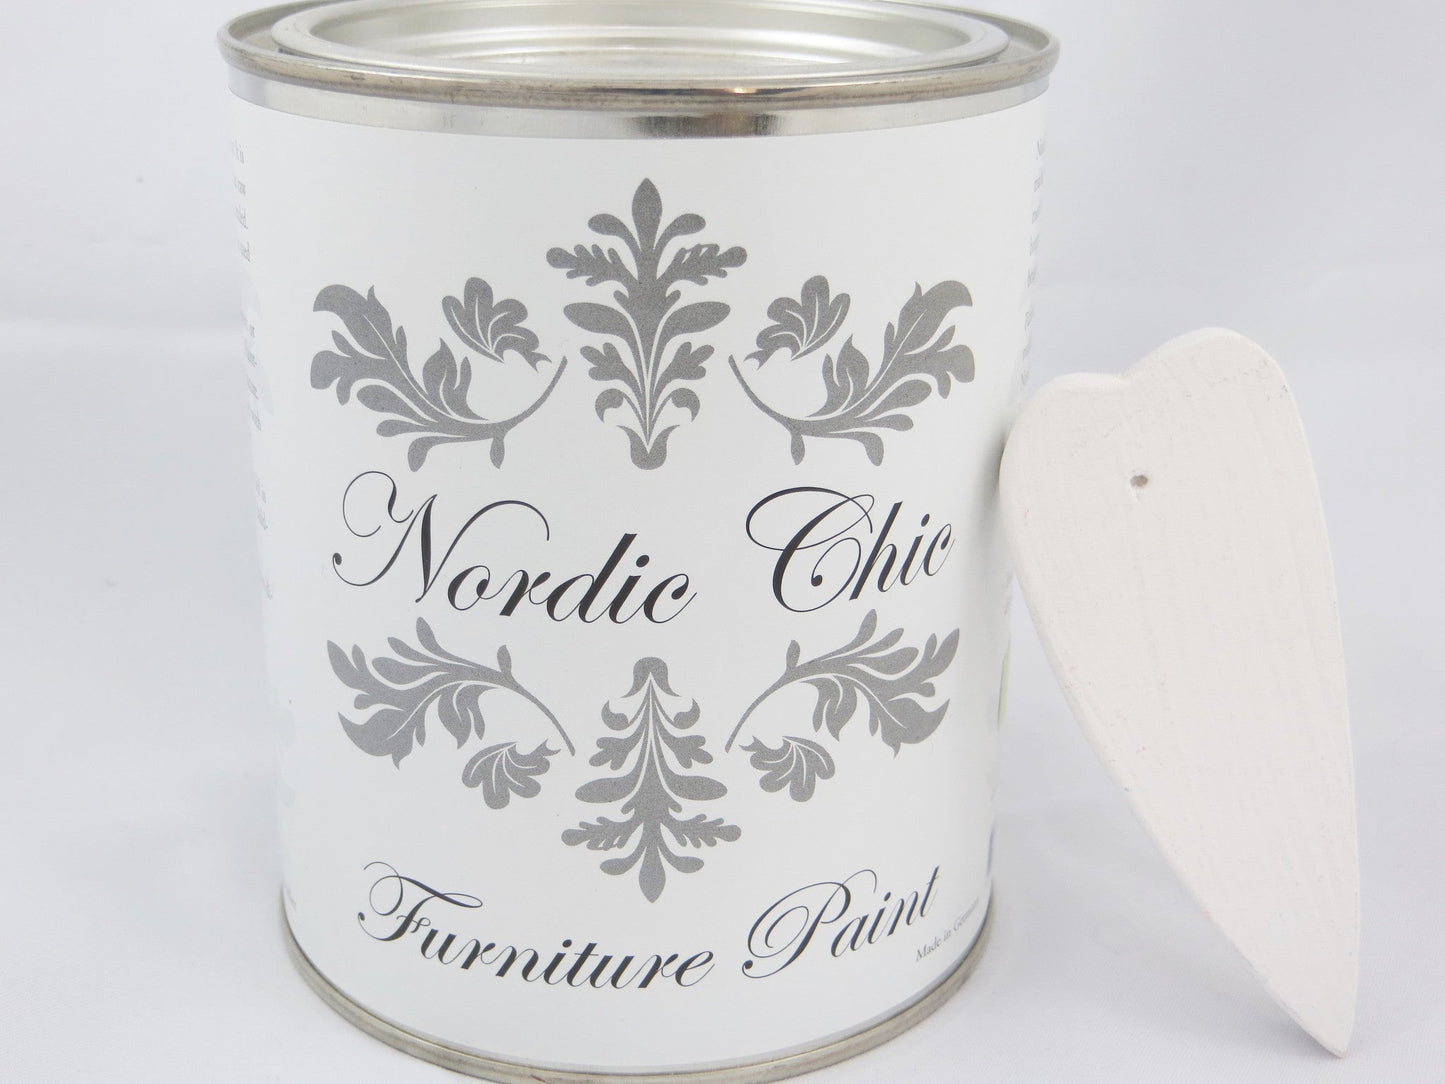 Nordic Chic Furniture Paint - Nordic Chic (white) - Nordic Chic®